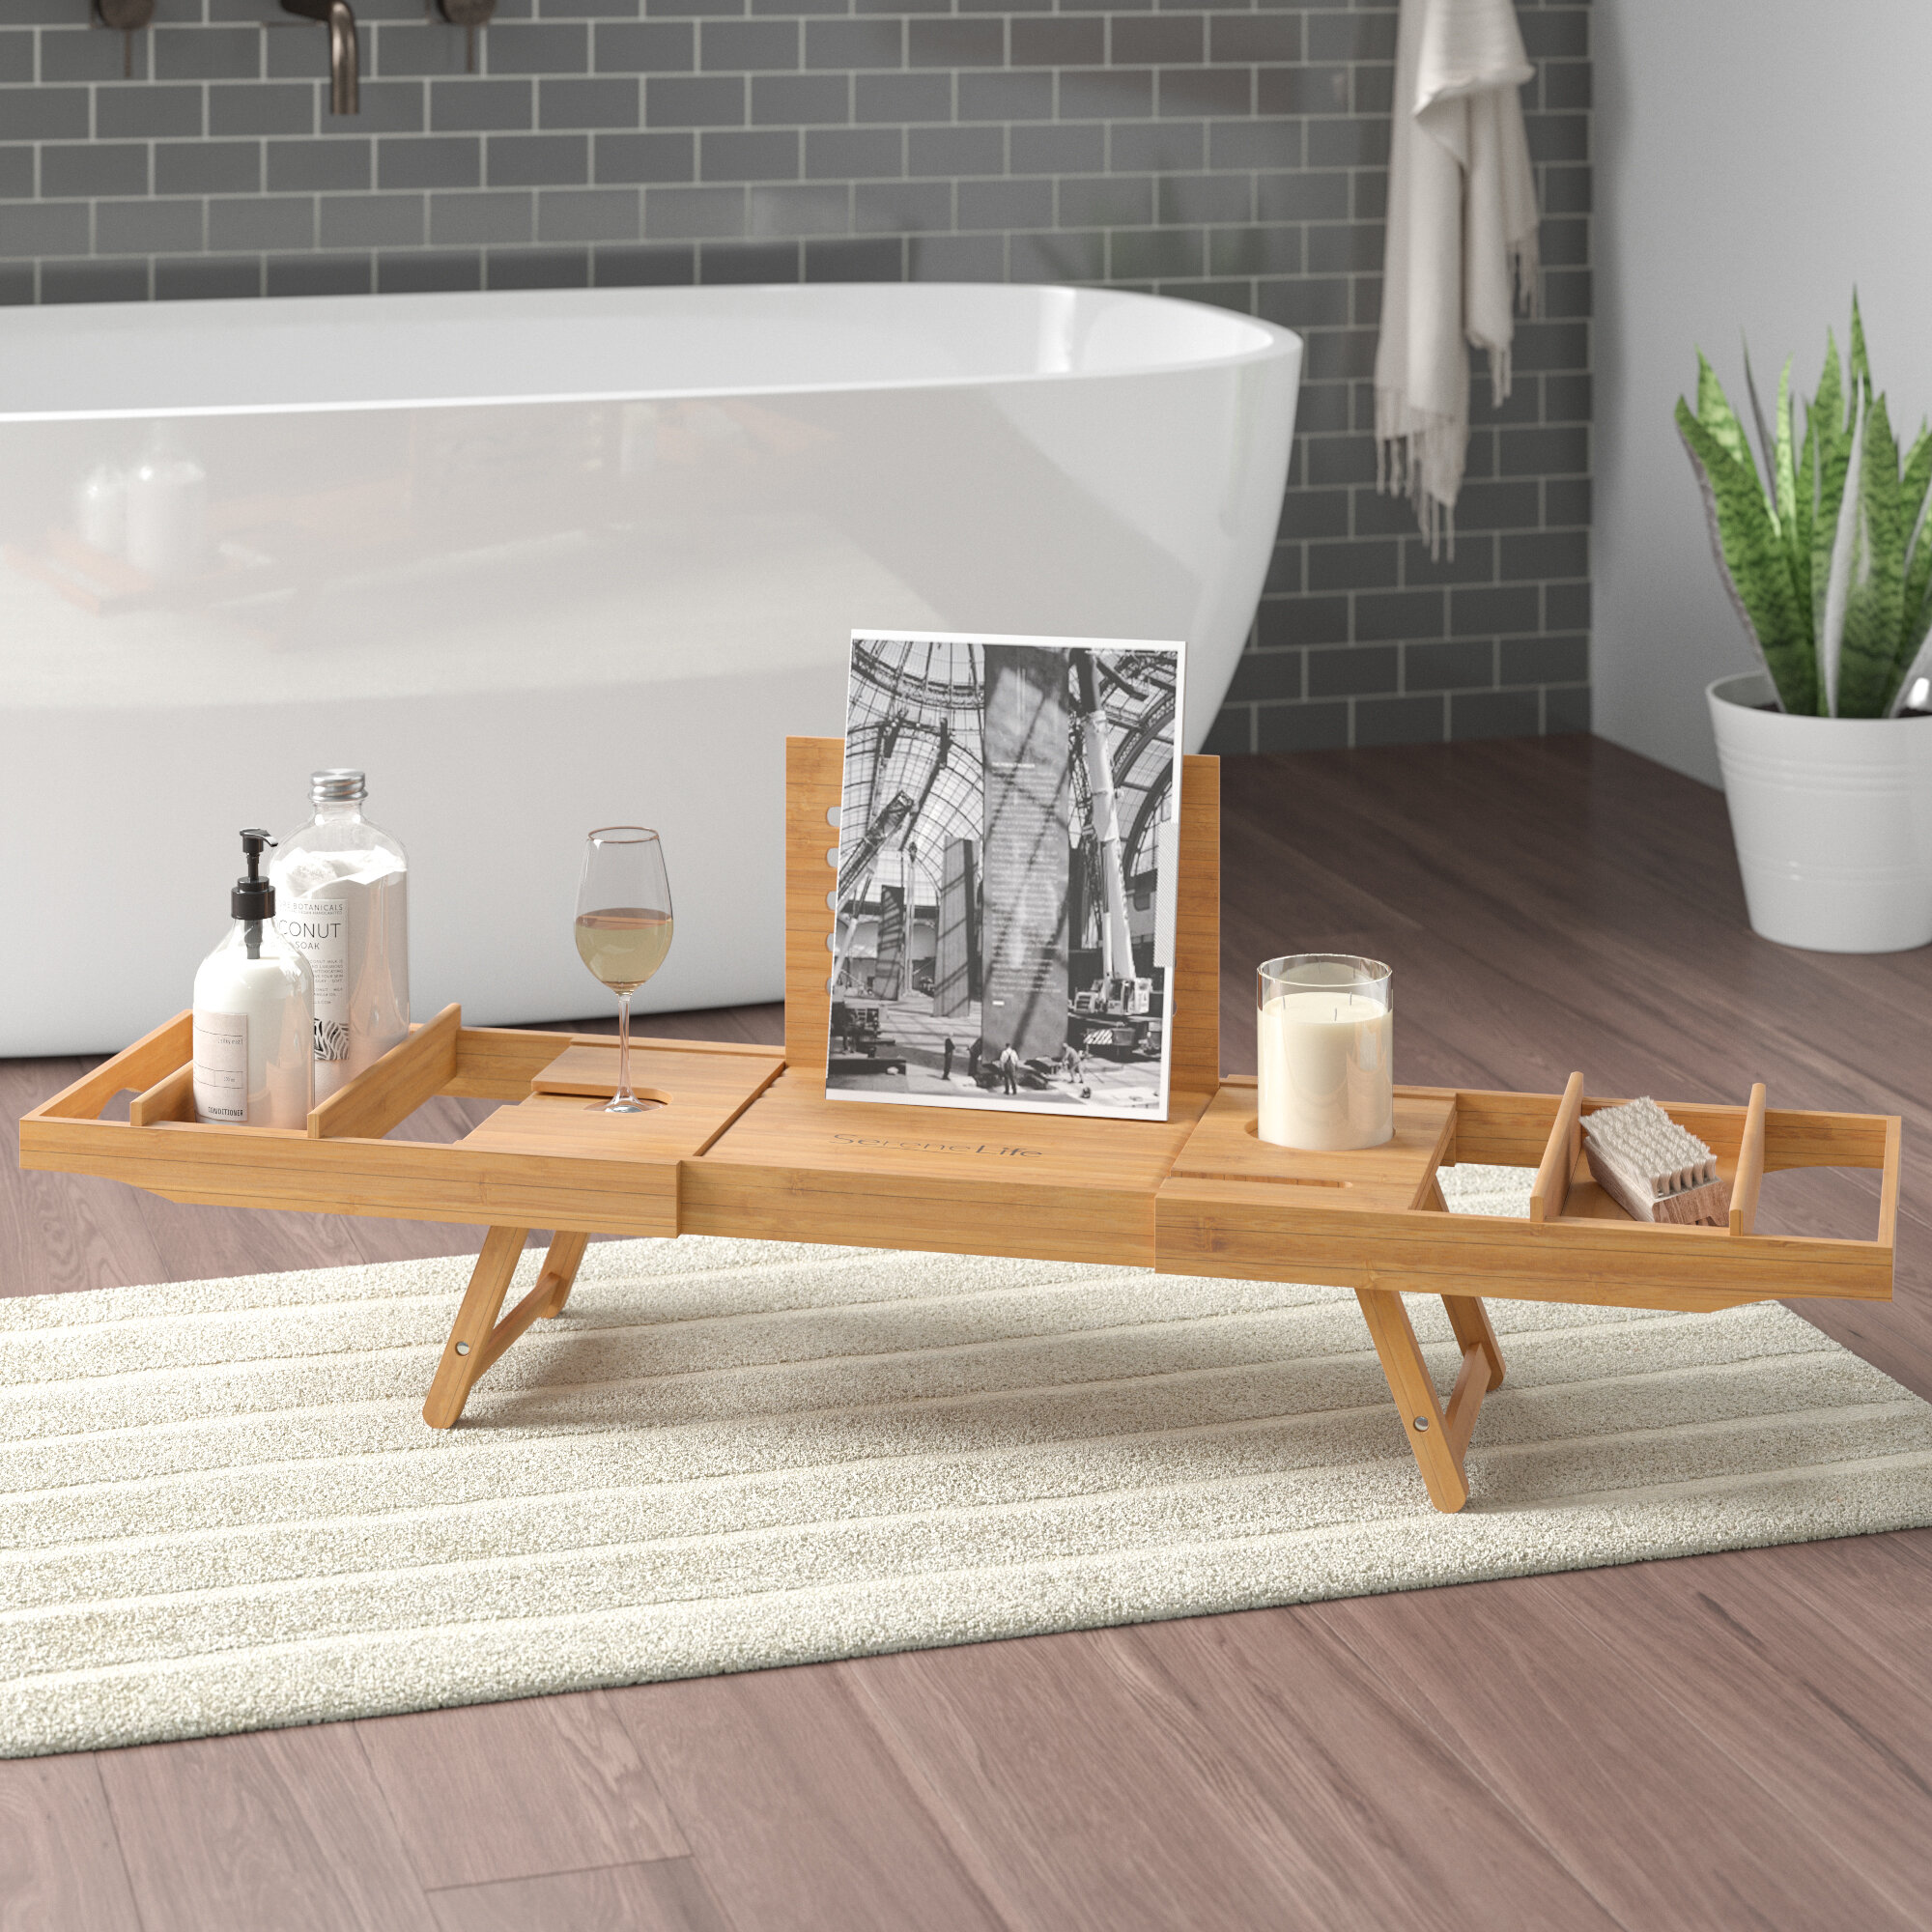 WELTRXE Extendable Bath Caddy Tray Natural Bamboo Bathtub Shelf Adjustable Bathtub Table Bath Tub Rack Board with Build-in Holder for Wine Glass,Tablet,Phone,Book,Hotel 